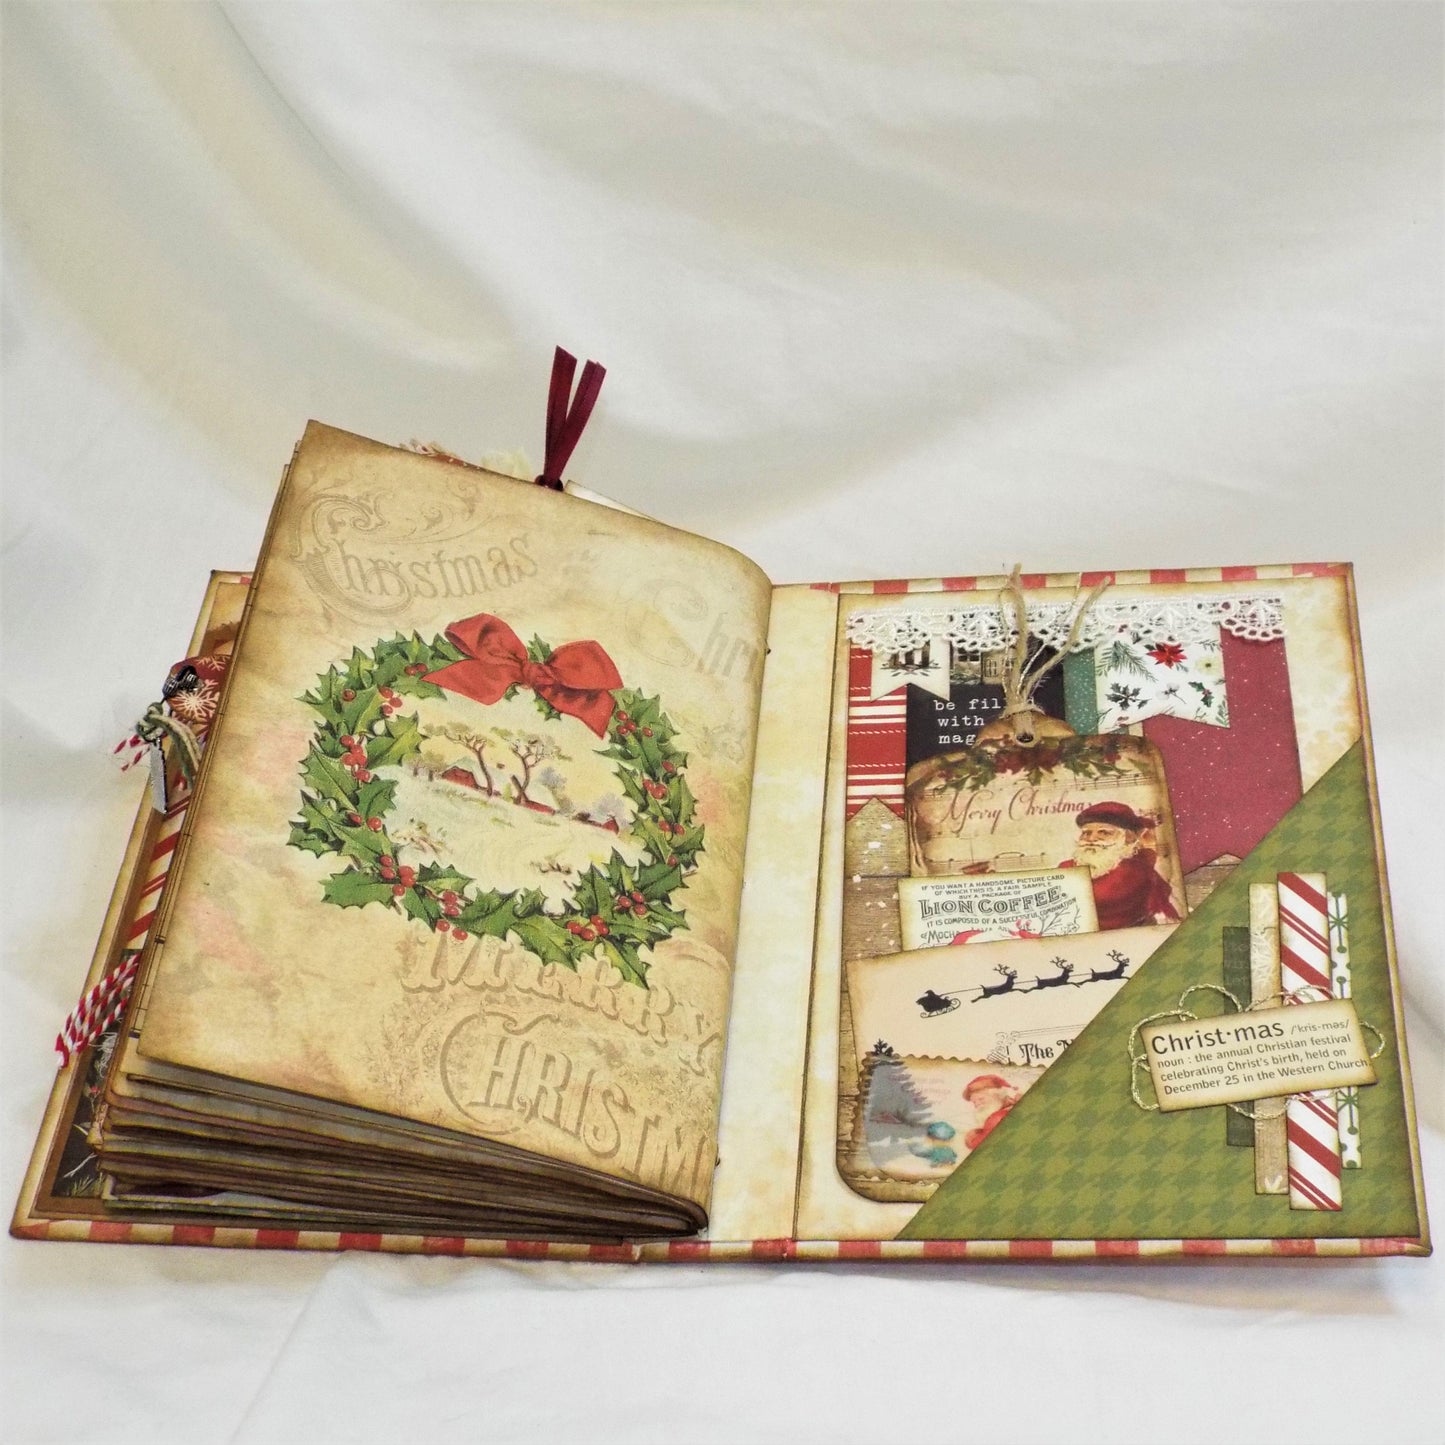 Christmas Junk Journal, completed